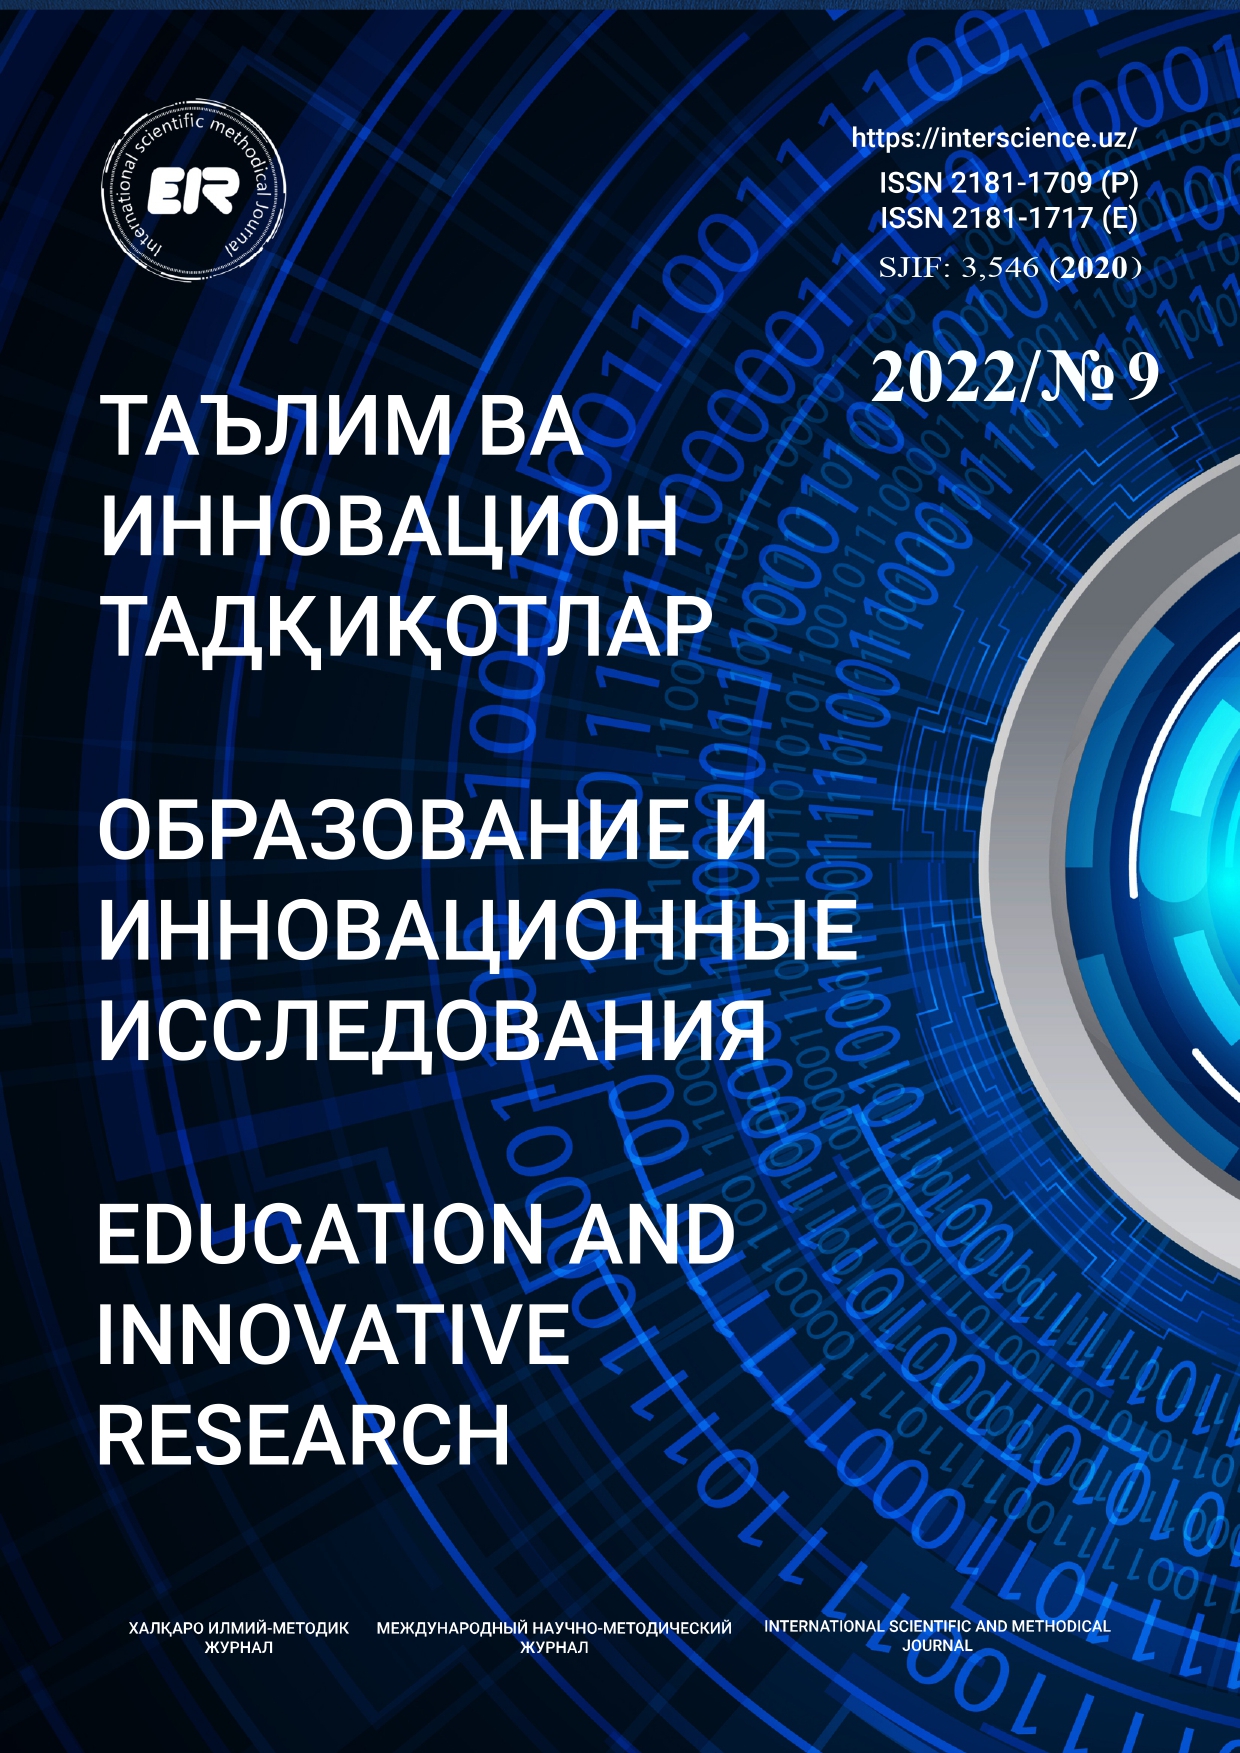 					View No. 9 (2022): Education and innovative research
				